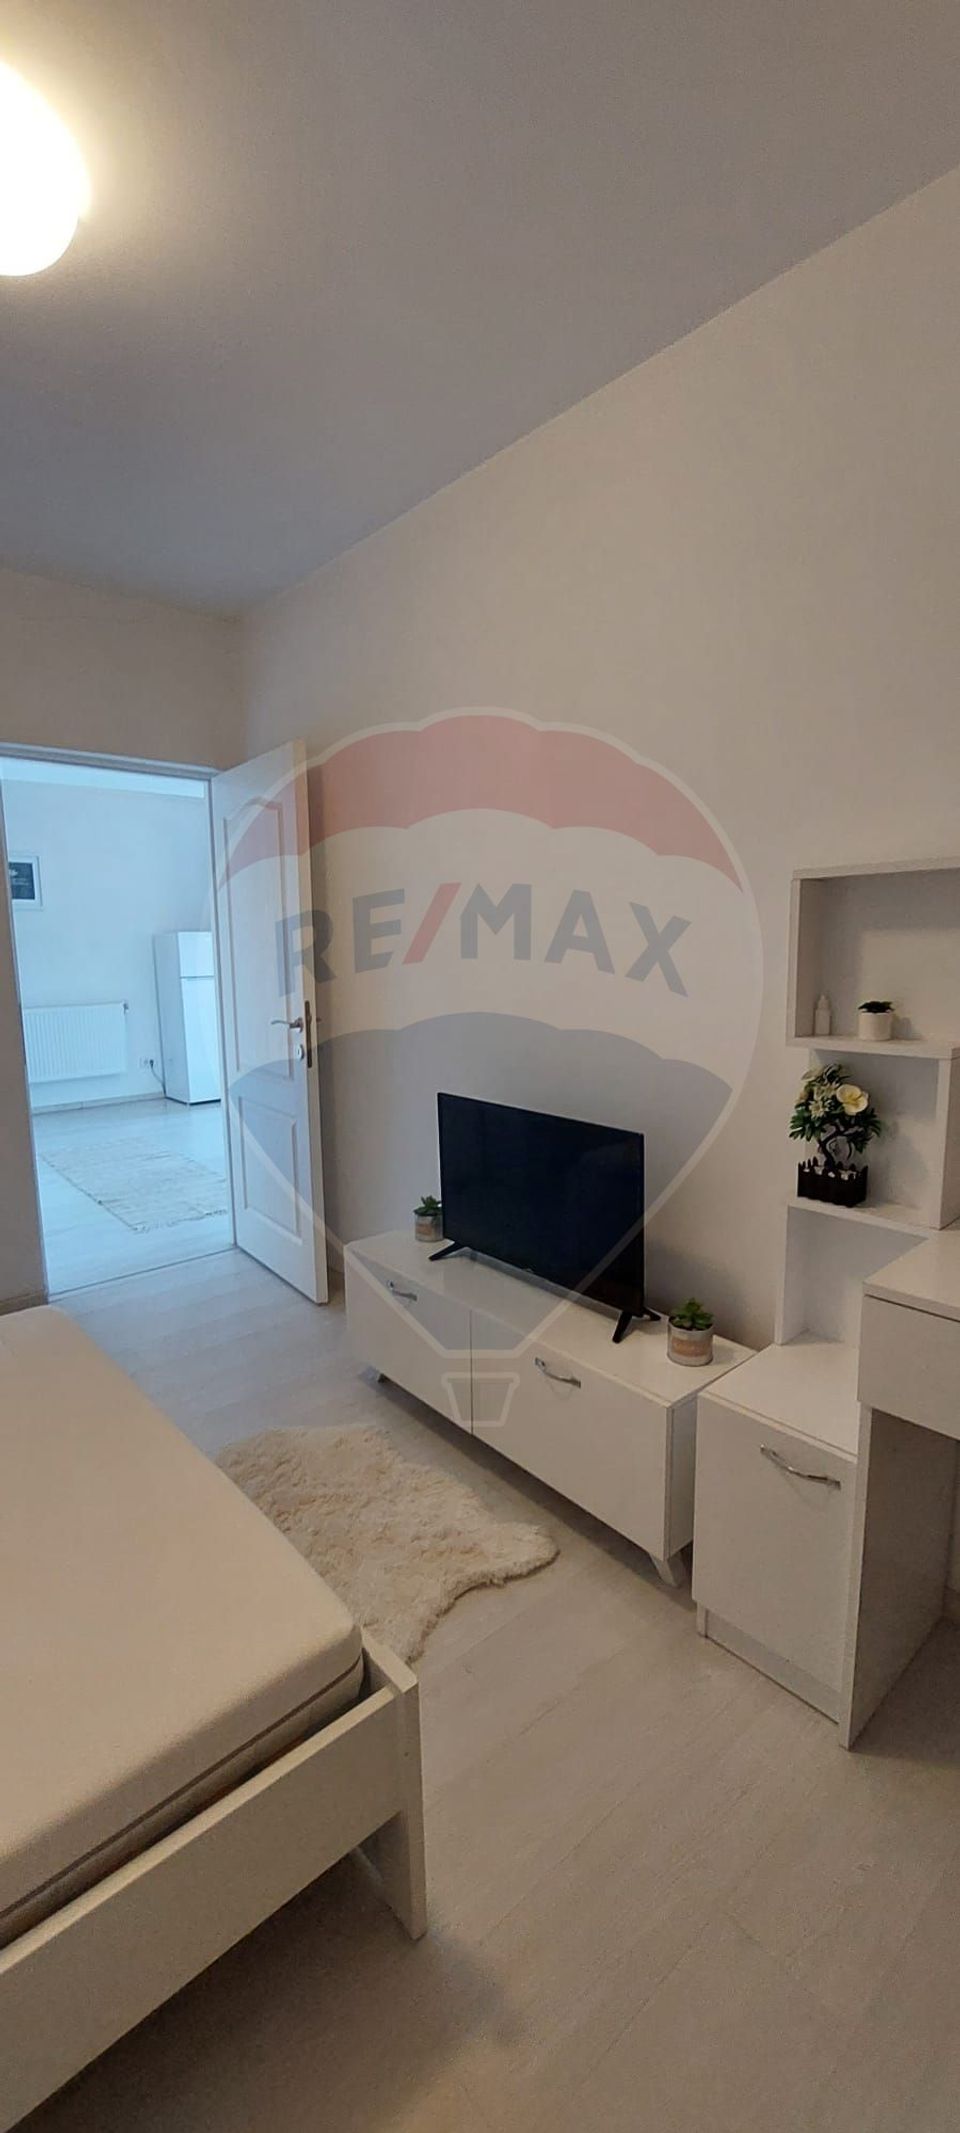 Rent apartment 2 rooms and terrace, central heating, Colentina